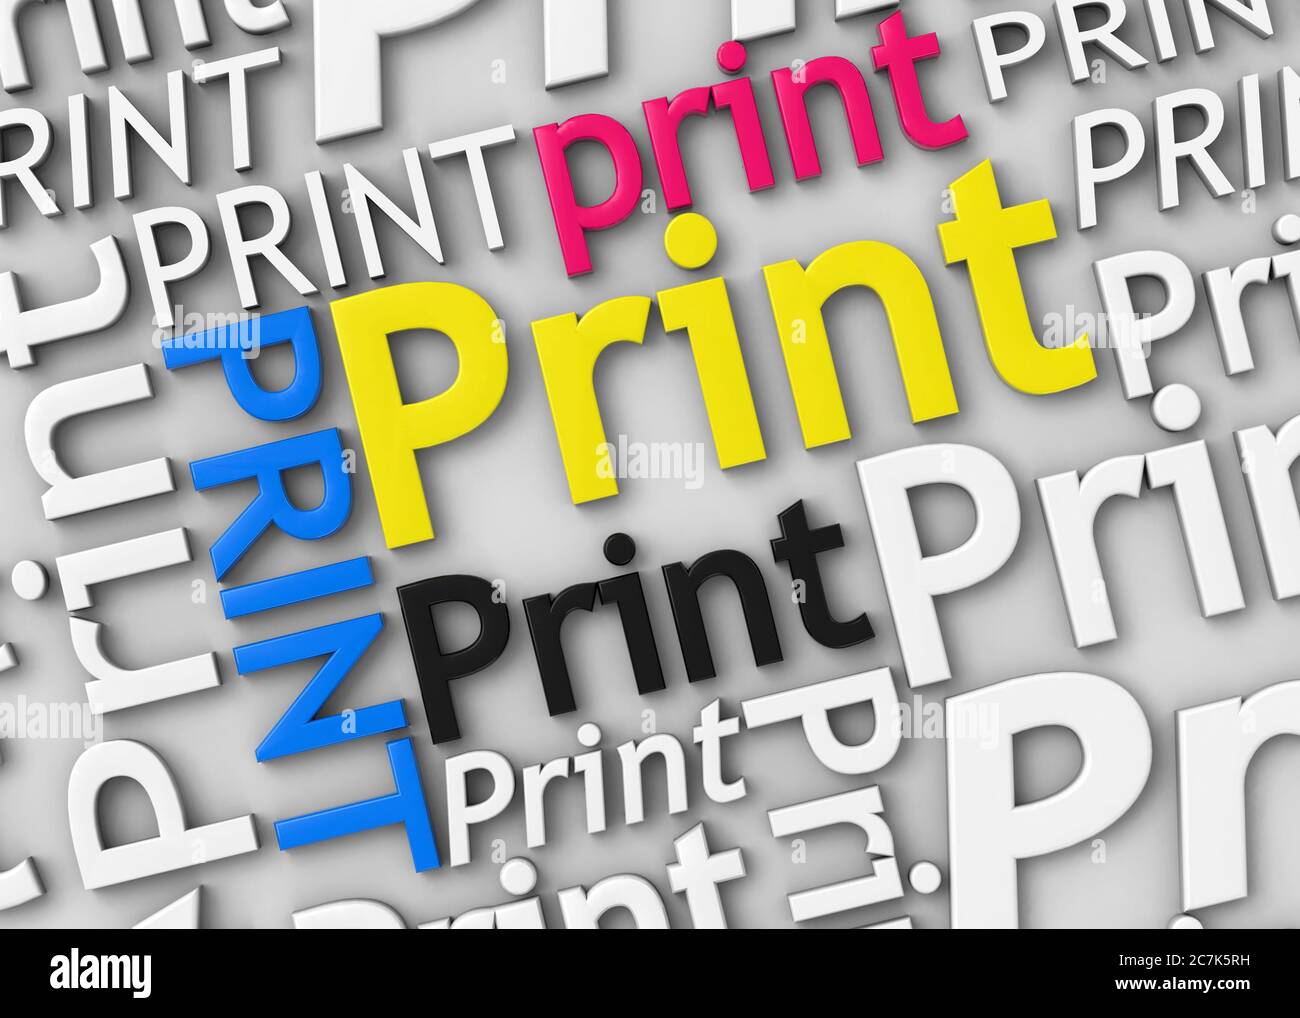 The Print Background - 3D Stock Photo